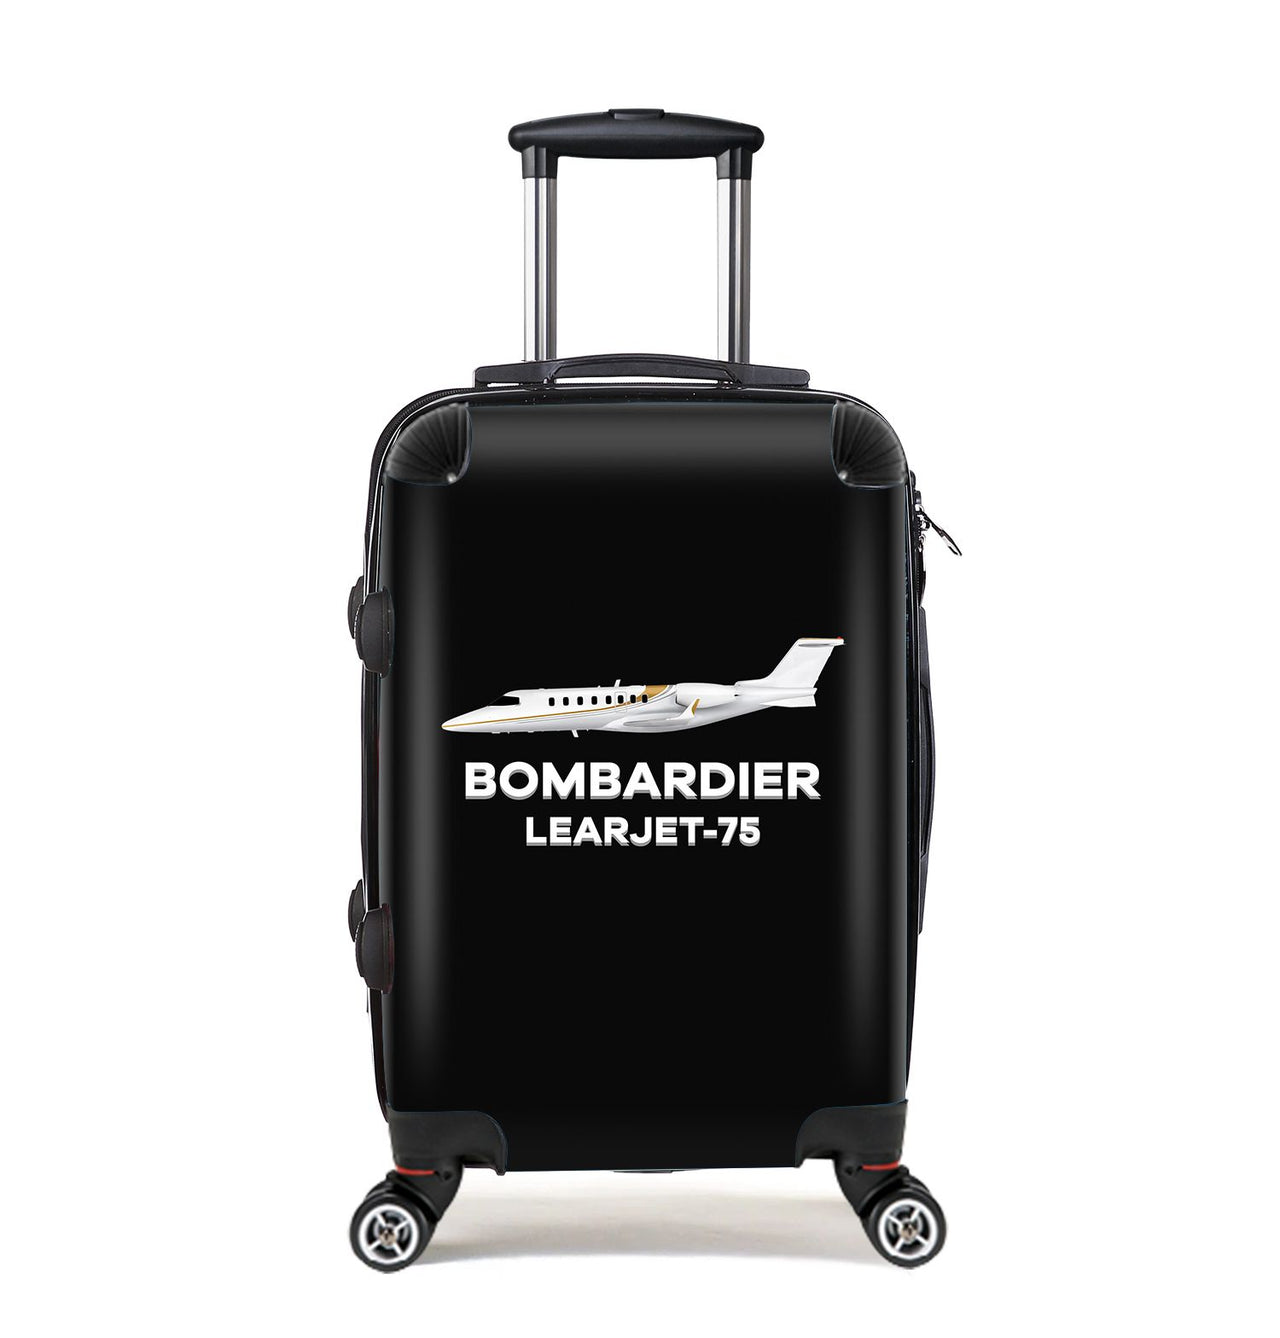 The Bombardier Learjet 75 Designed Cabin Size Luggages